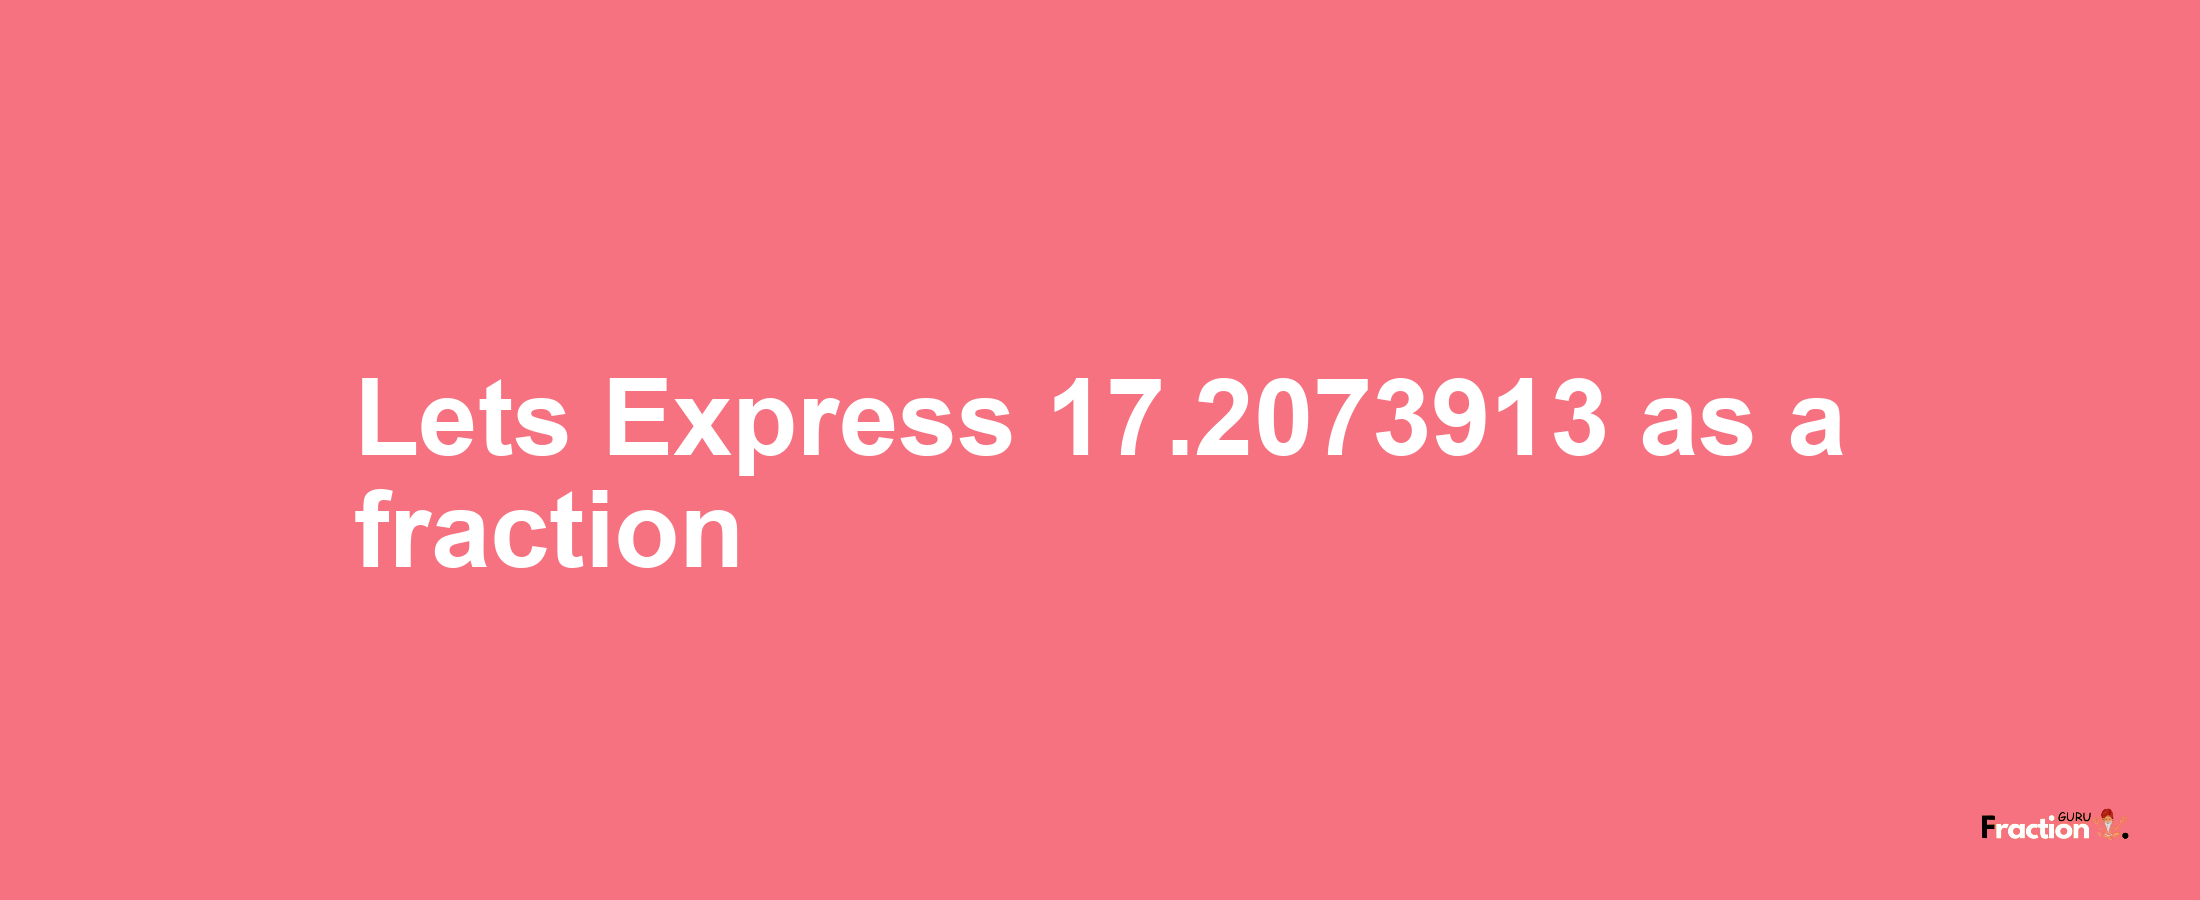 Lets Express 17.2073913 as afraction